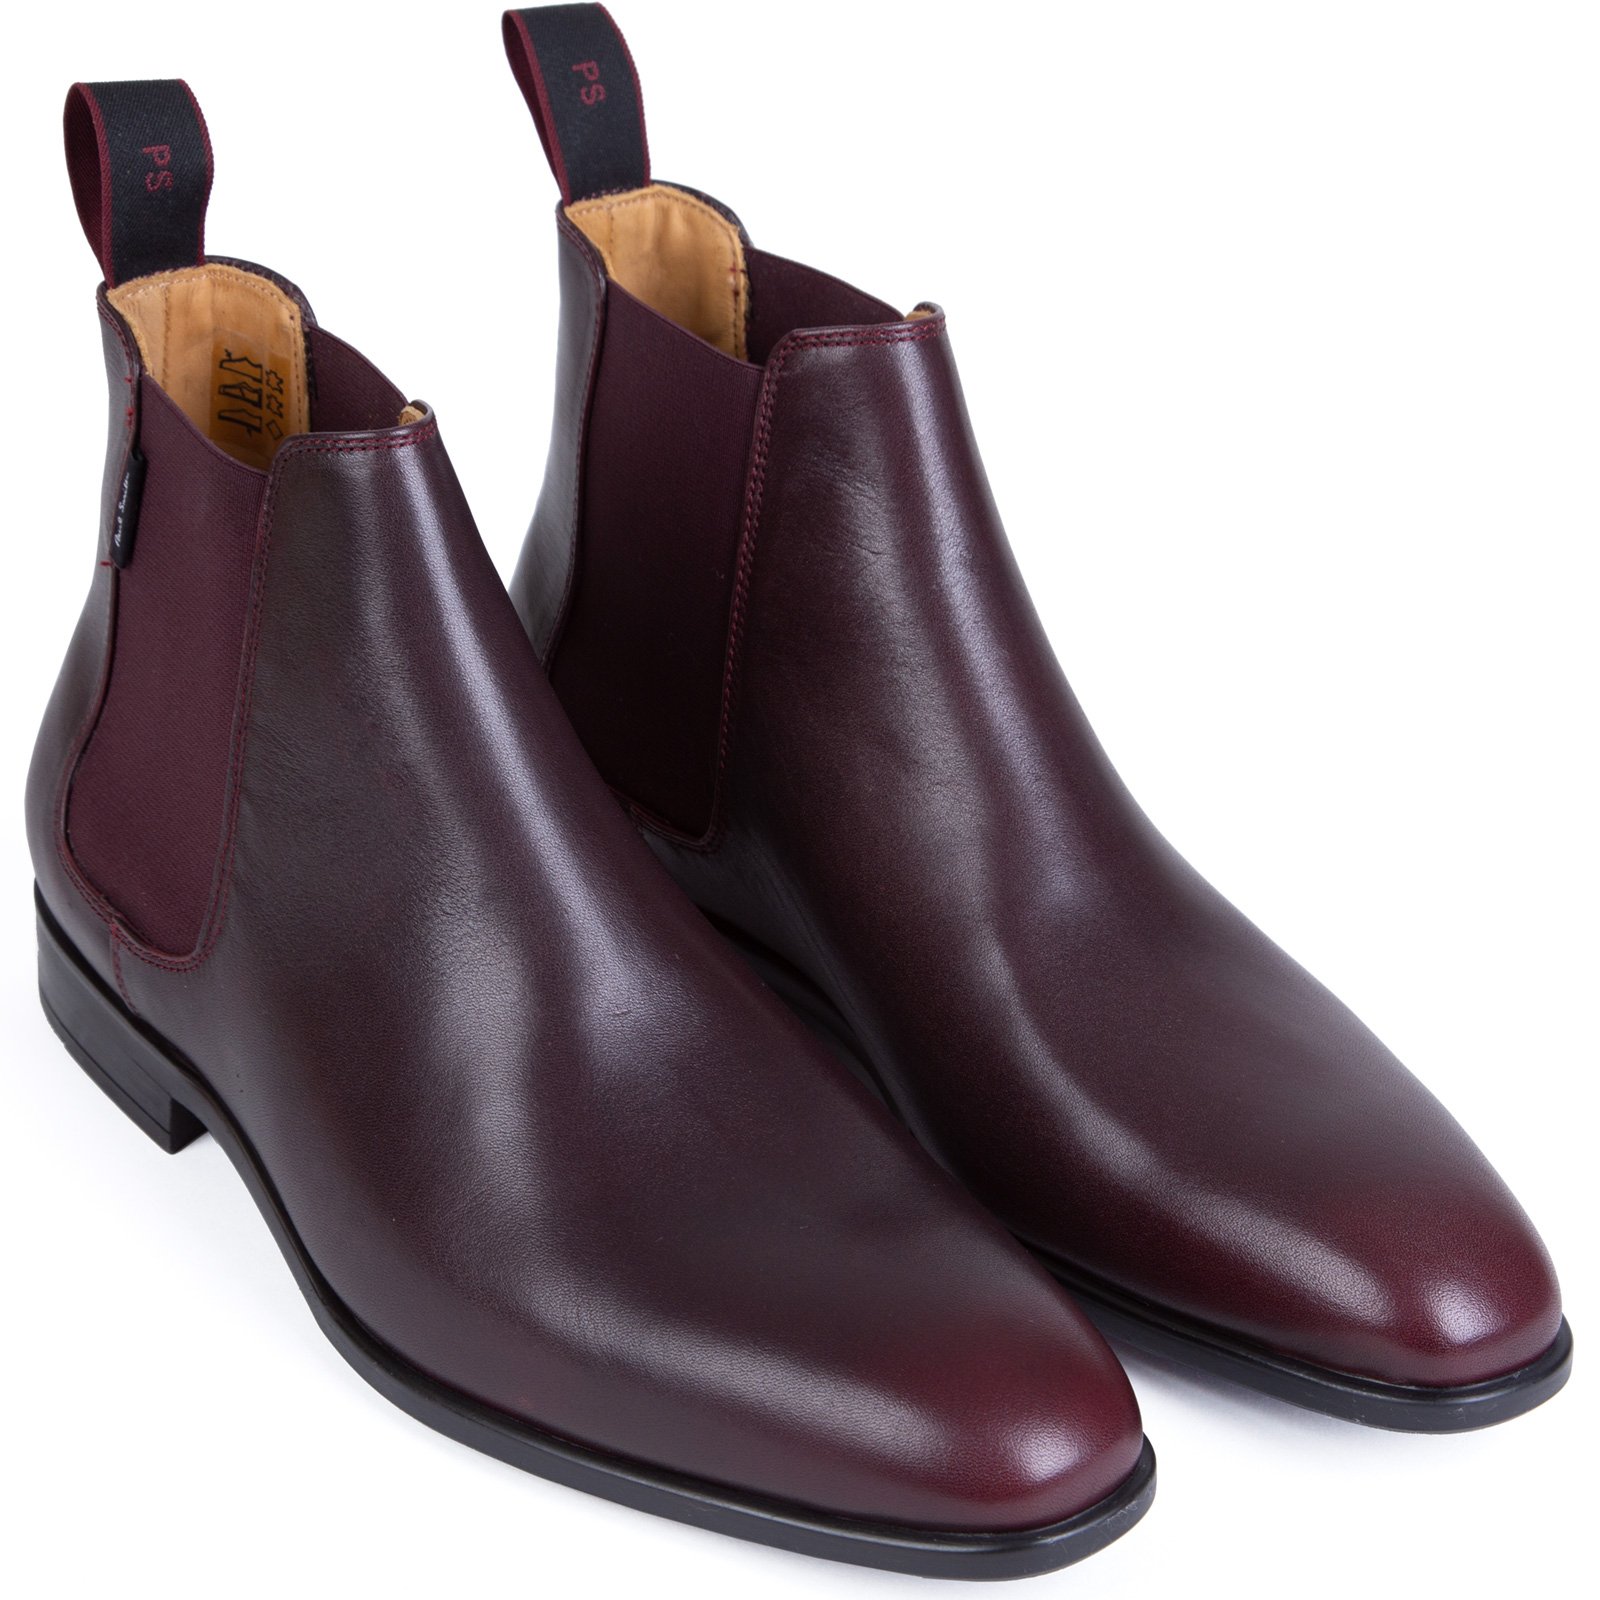 Gerald Burgundy Leather Chelsea Boot - Shoes & Boots-Dress Shoes ...